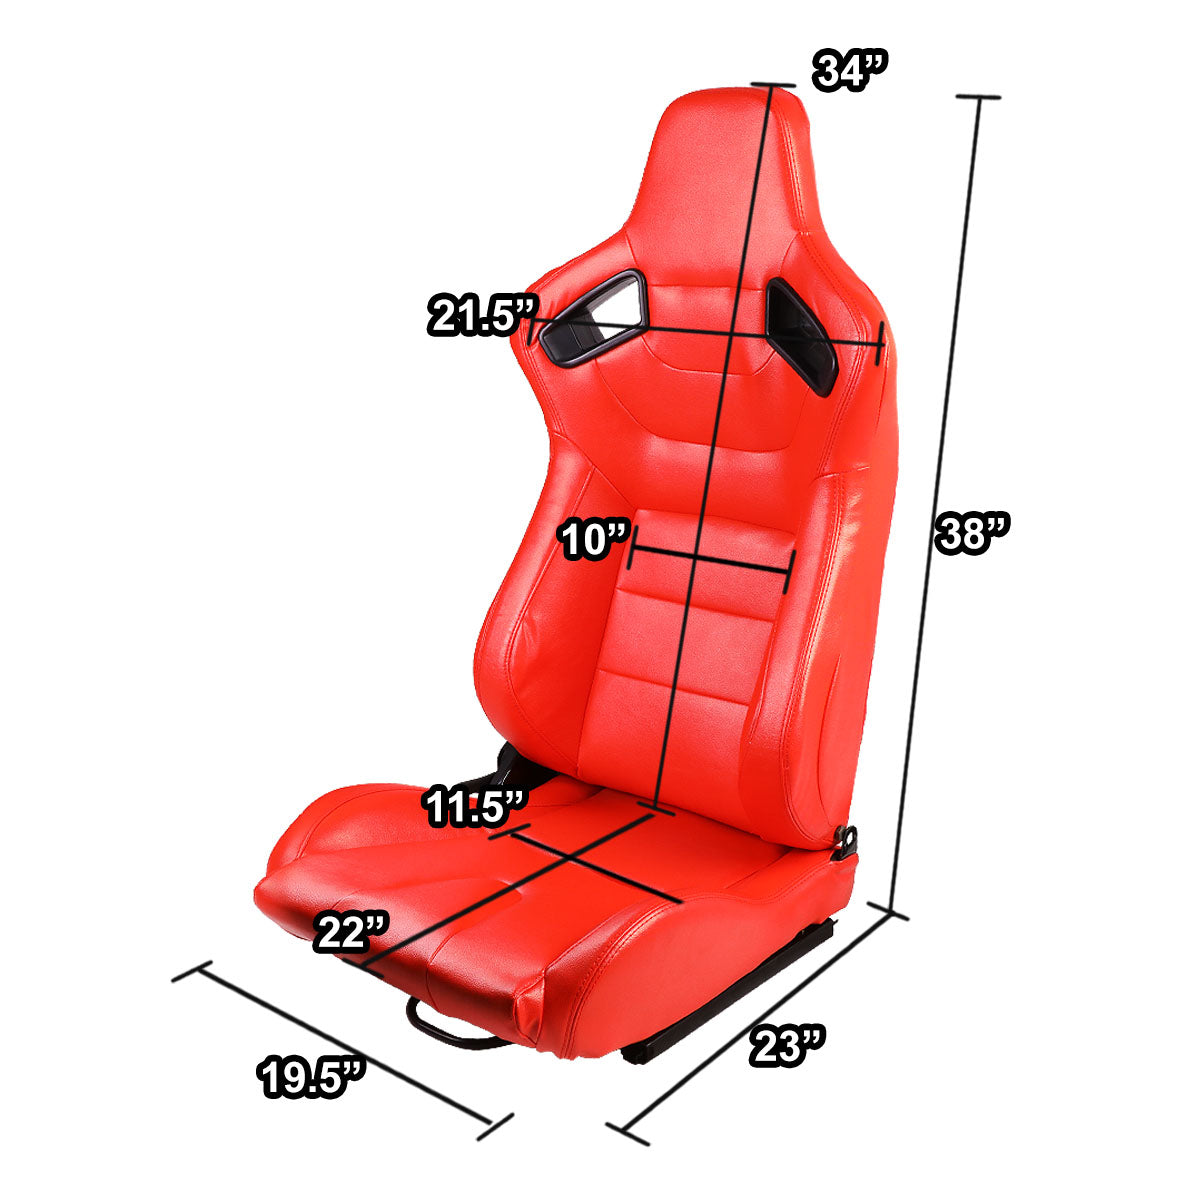 Pair Full Reclinable PVC Leather Bucket Racing Seats w/Sliders